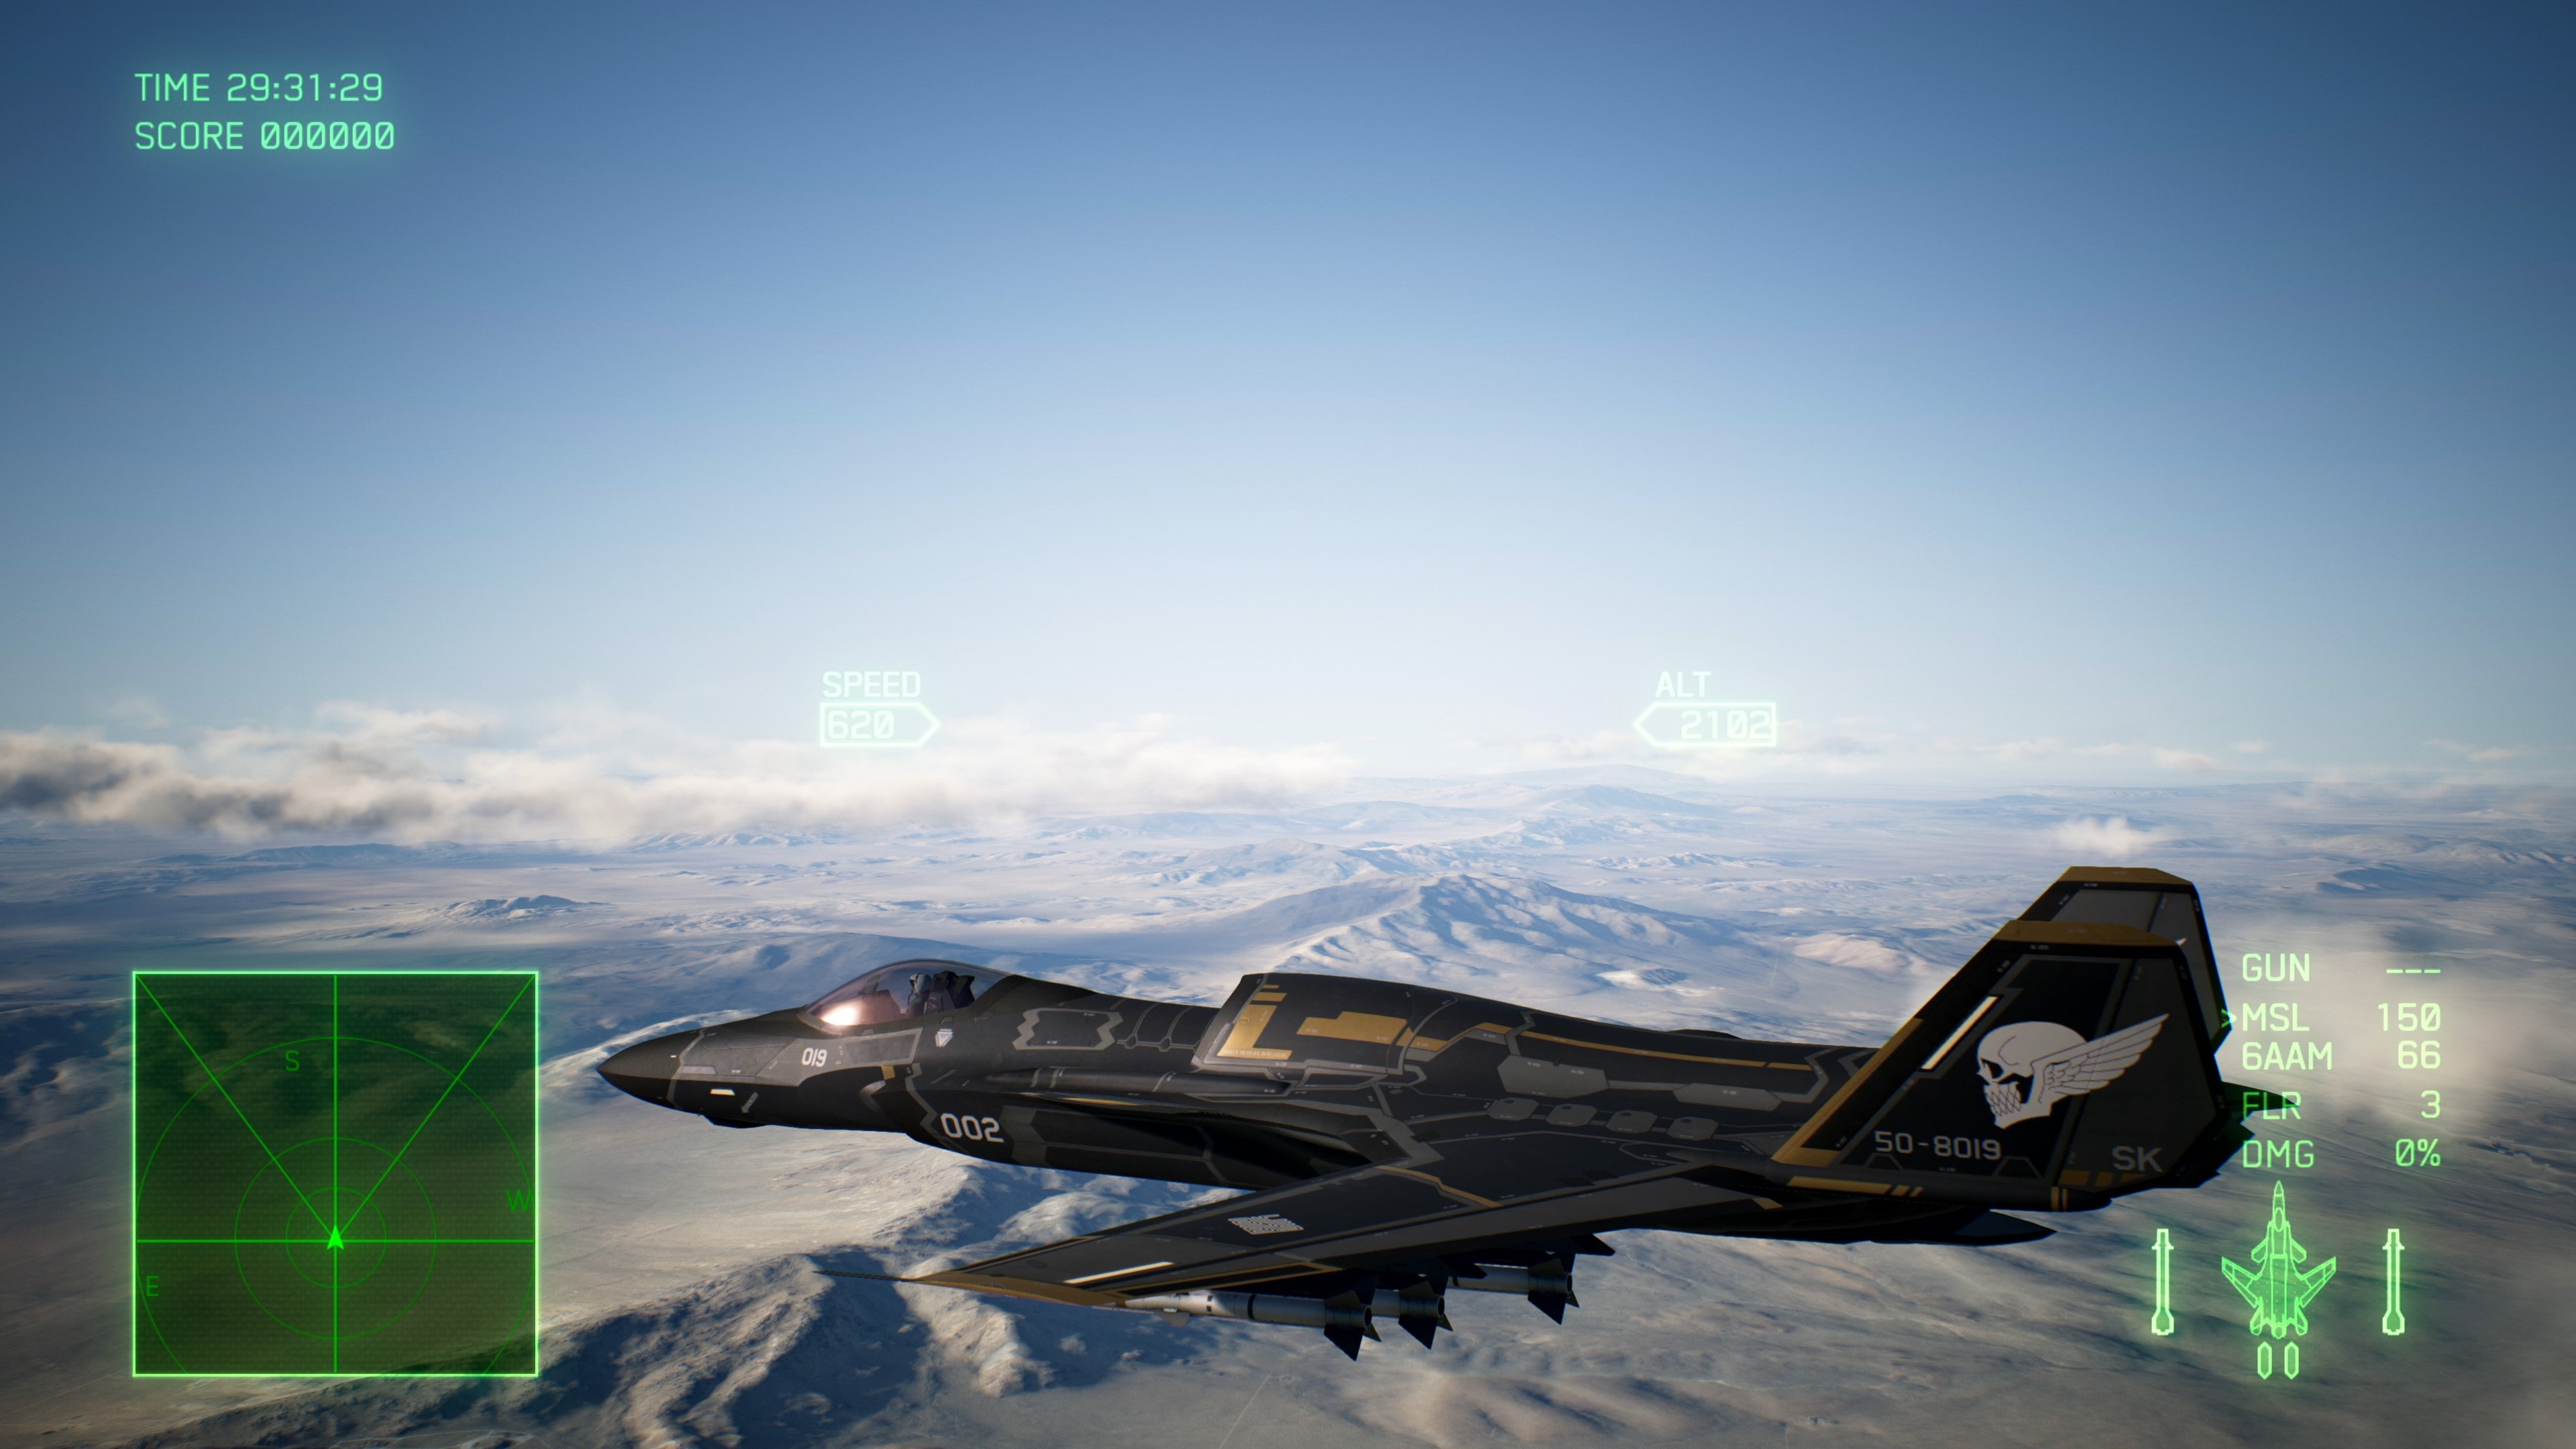 Ace Combat 7: Skies Unknown – Asf-X Shinden II Set on PS4 — price history,  screenshots, discounts • USA